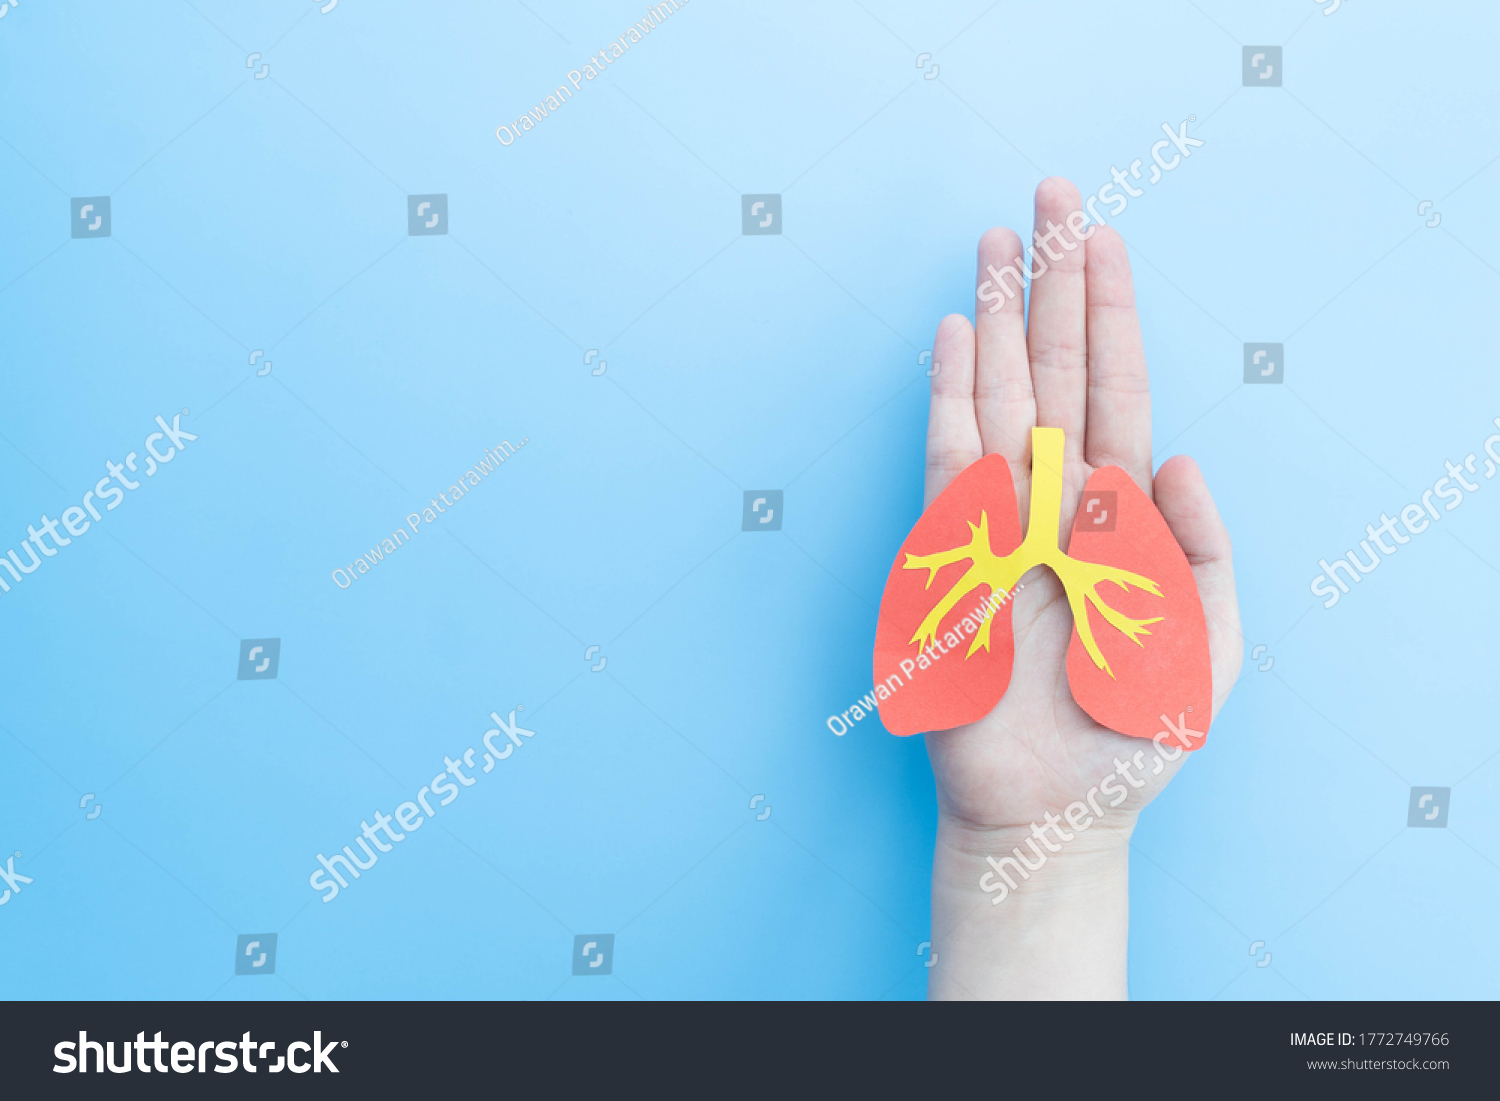 Pulmonary disease treatment and lung transplant concept. Human hands holding healthy lung shape made from paper on light blue background. Copy space.